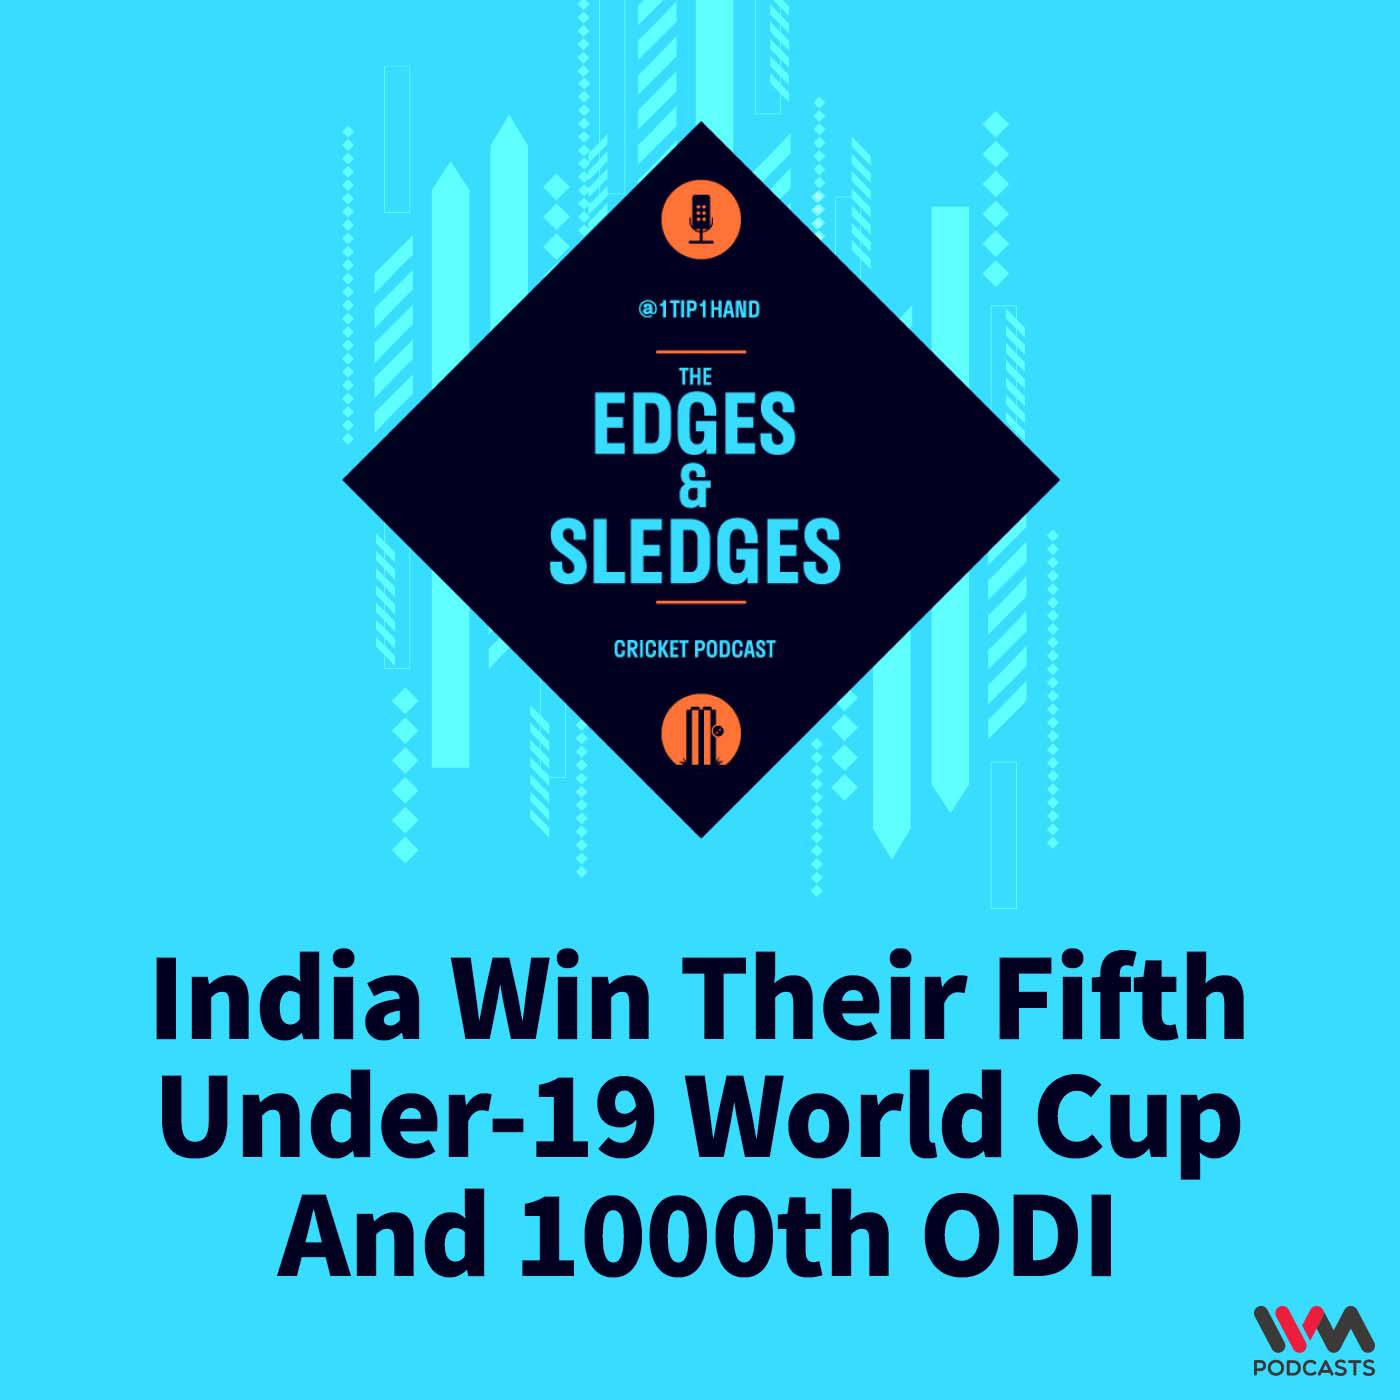 India Win Their Fifth Under-19 World Cup And 1000th ODI